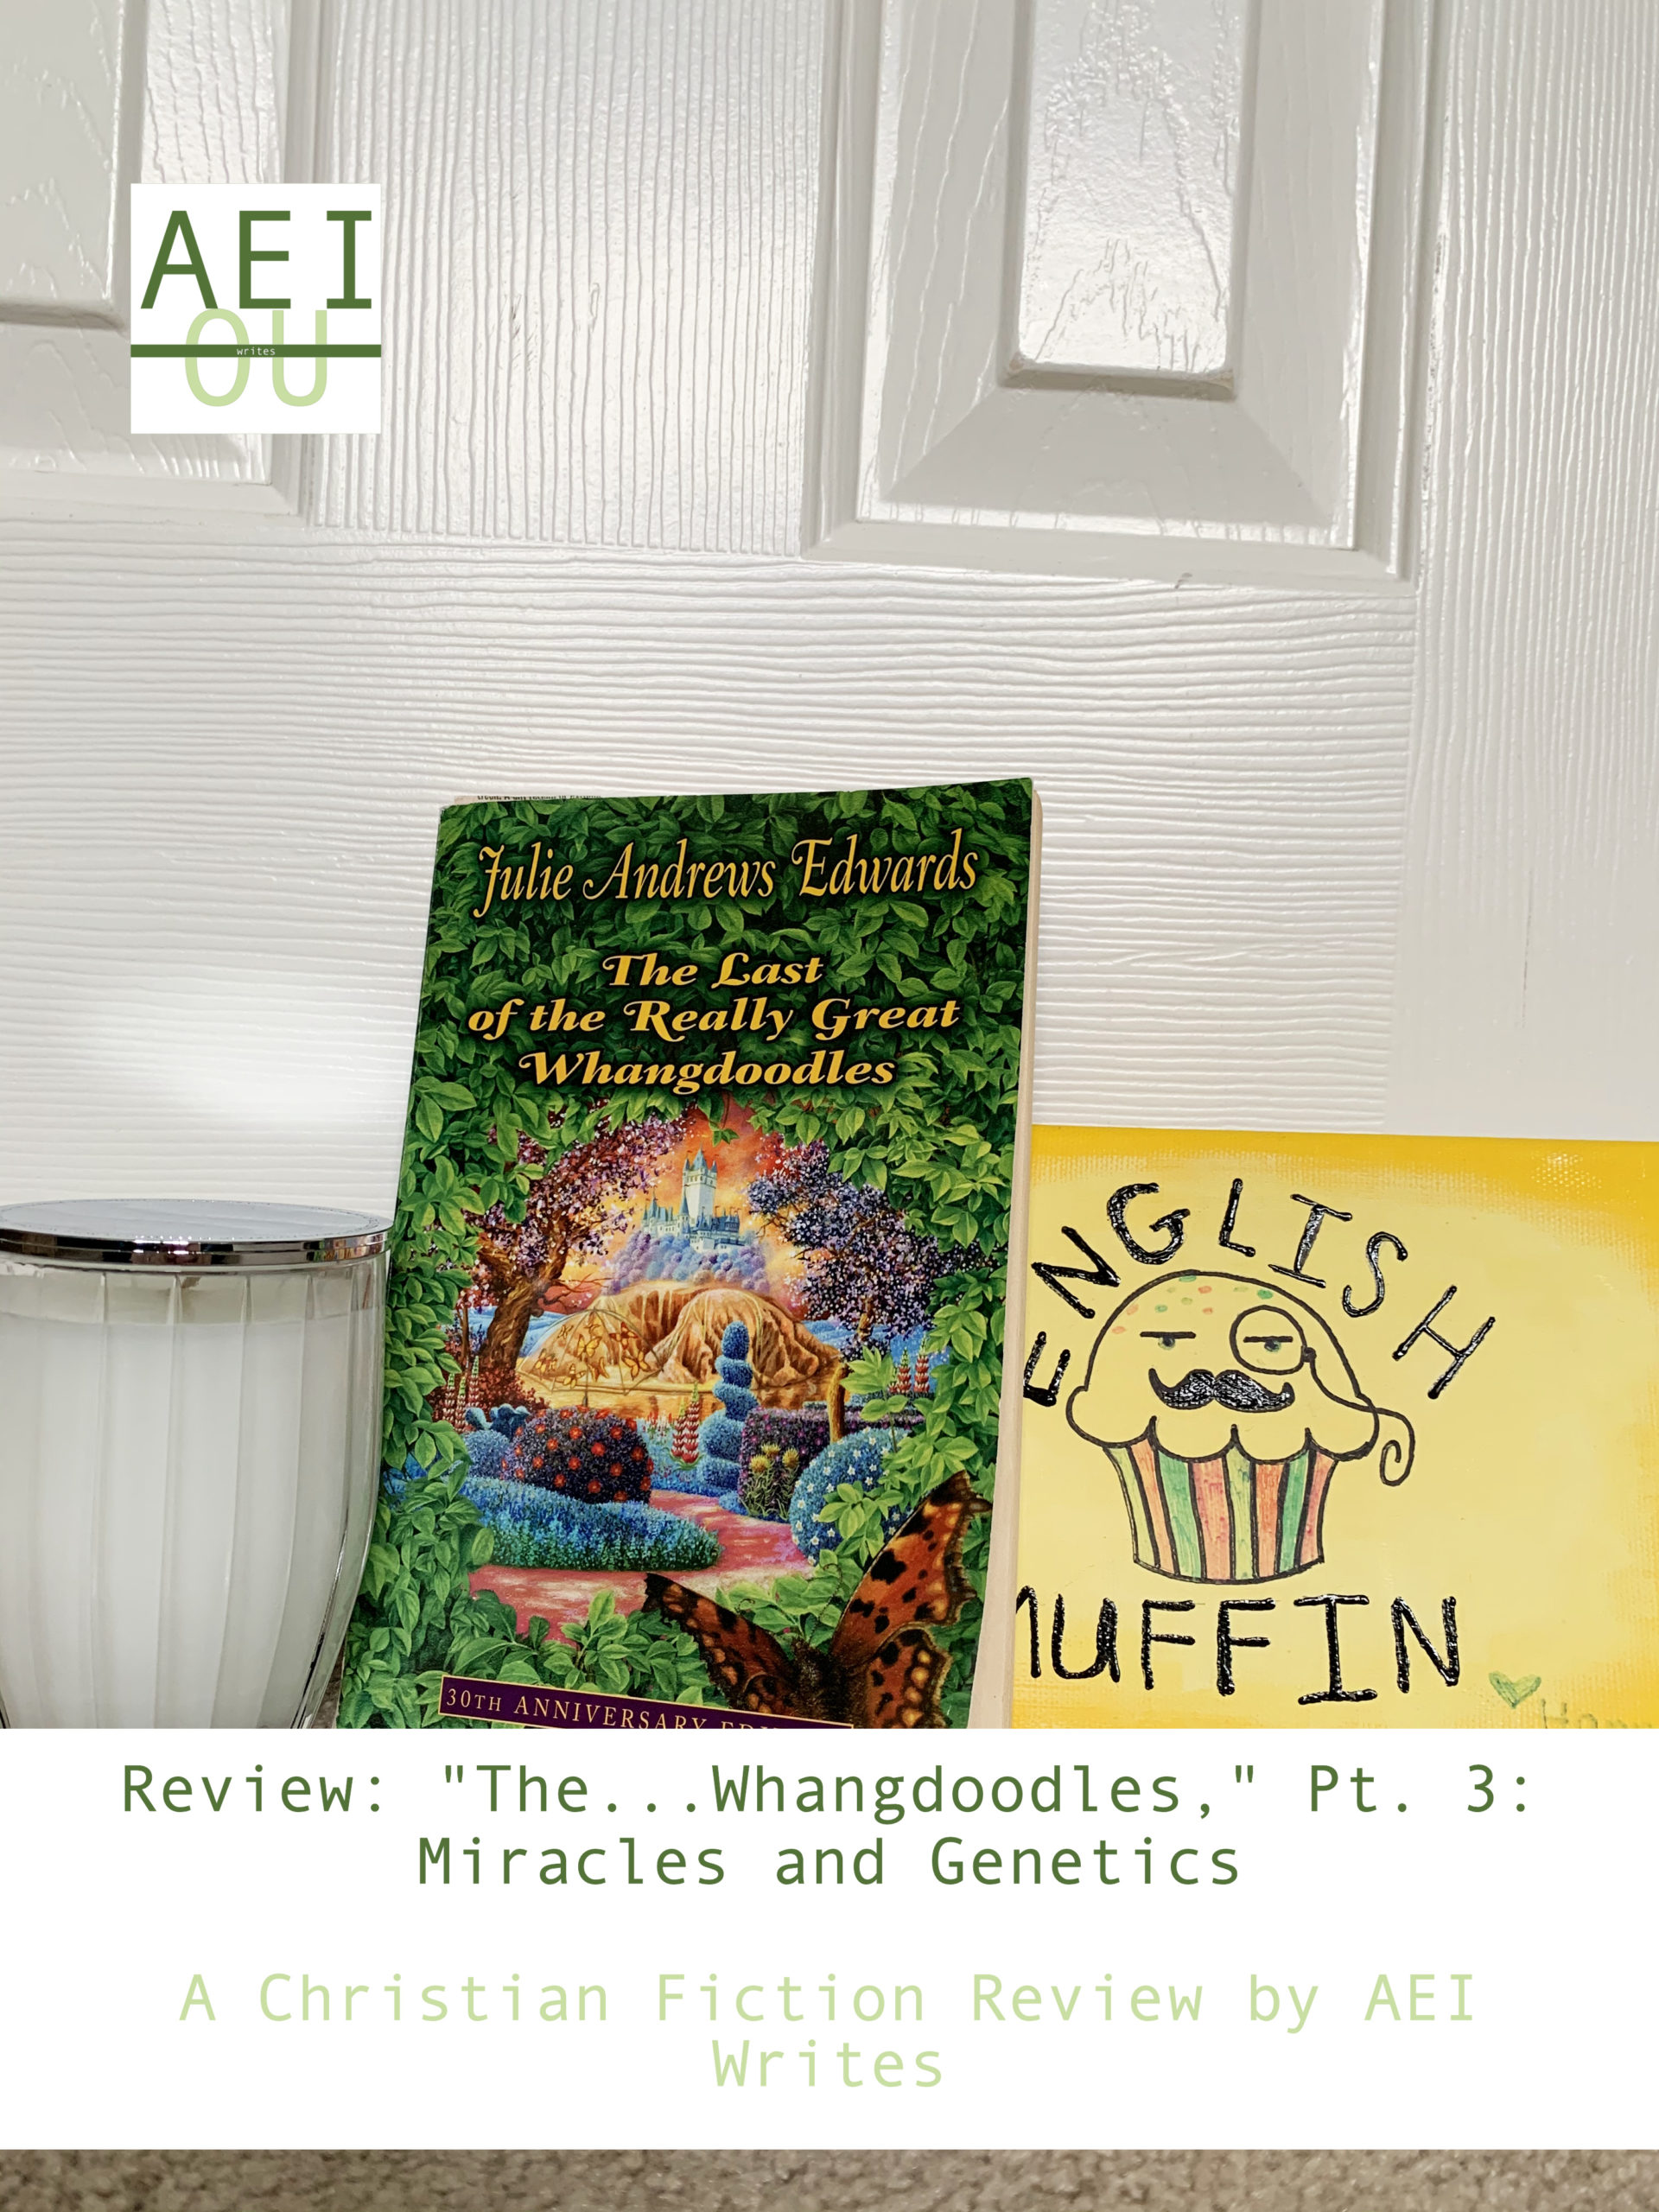 Review: “The…Whangdoodles,” Pt. 3, Miracles and Genetics